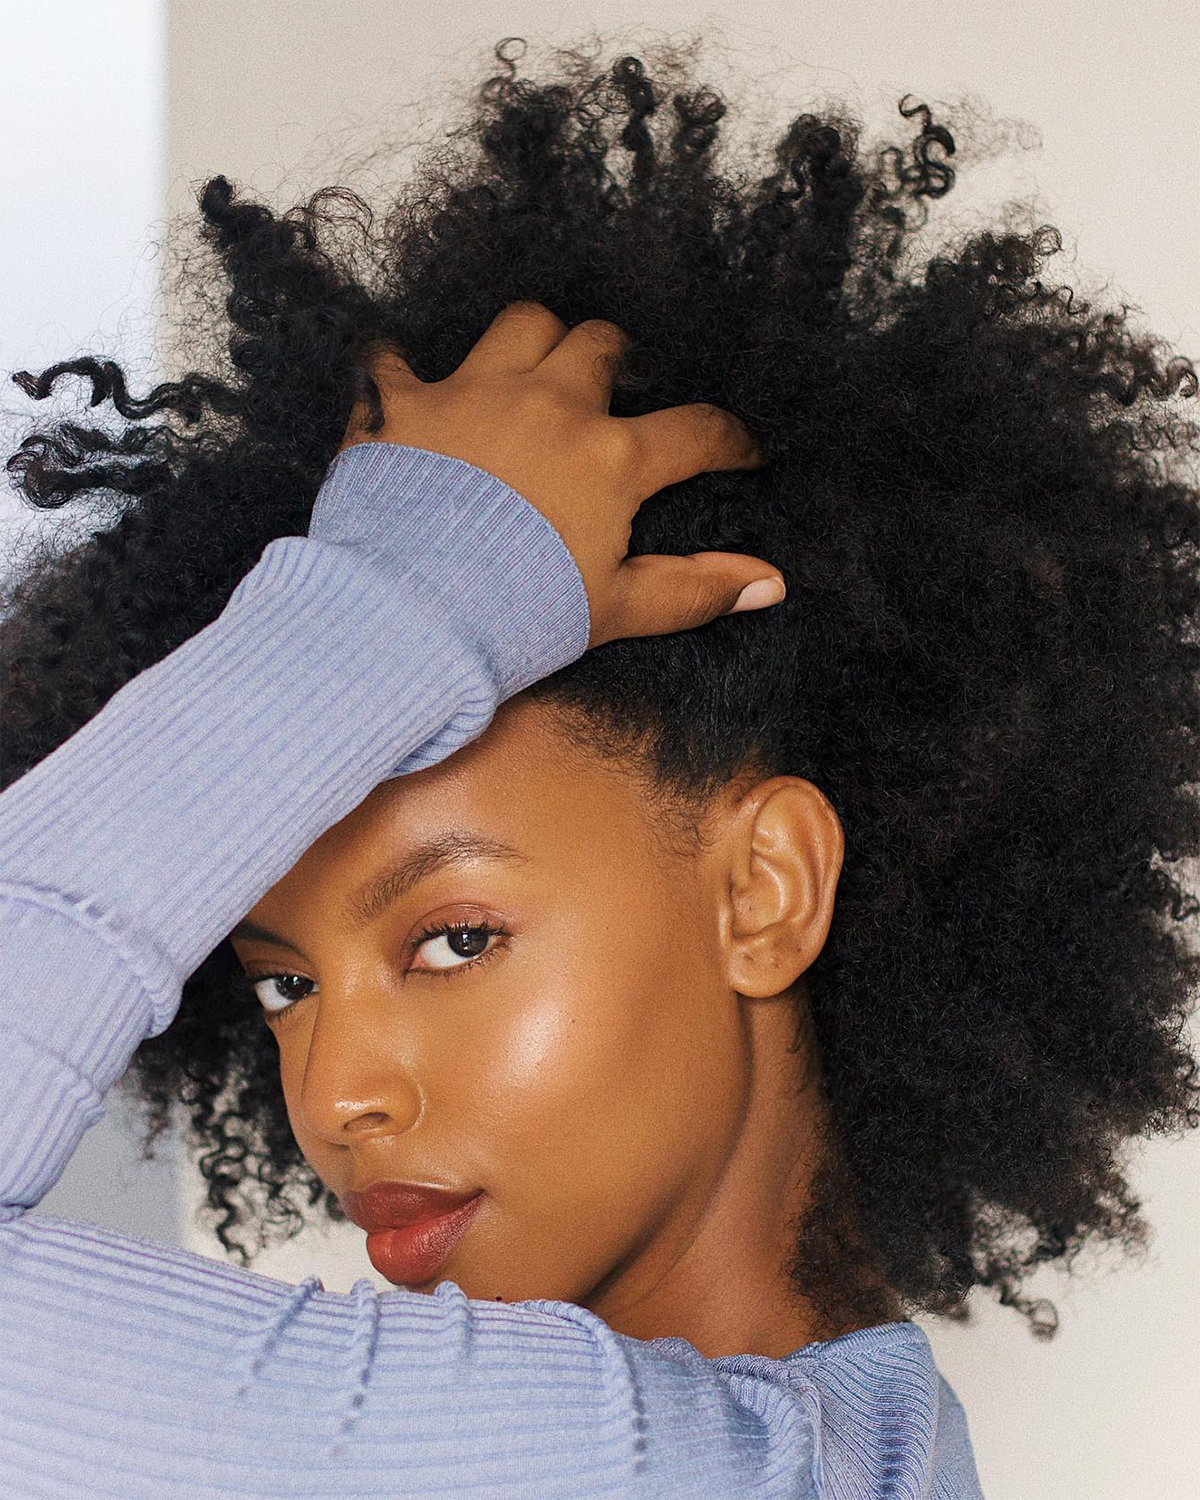 Sulfate-free shampoos and conditioners for natural hair